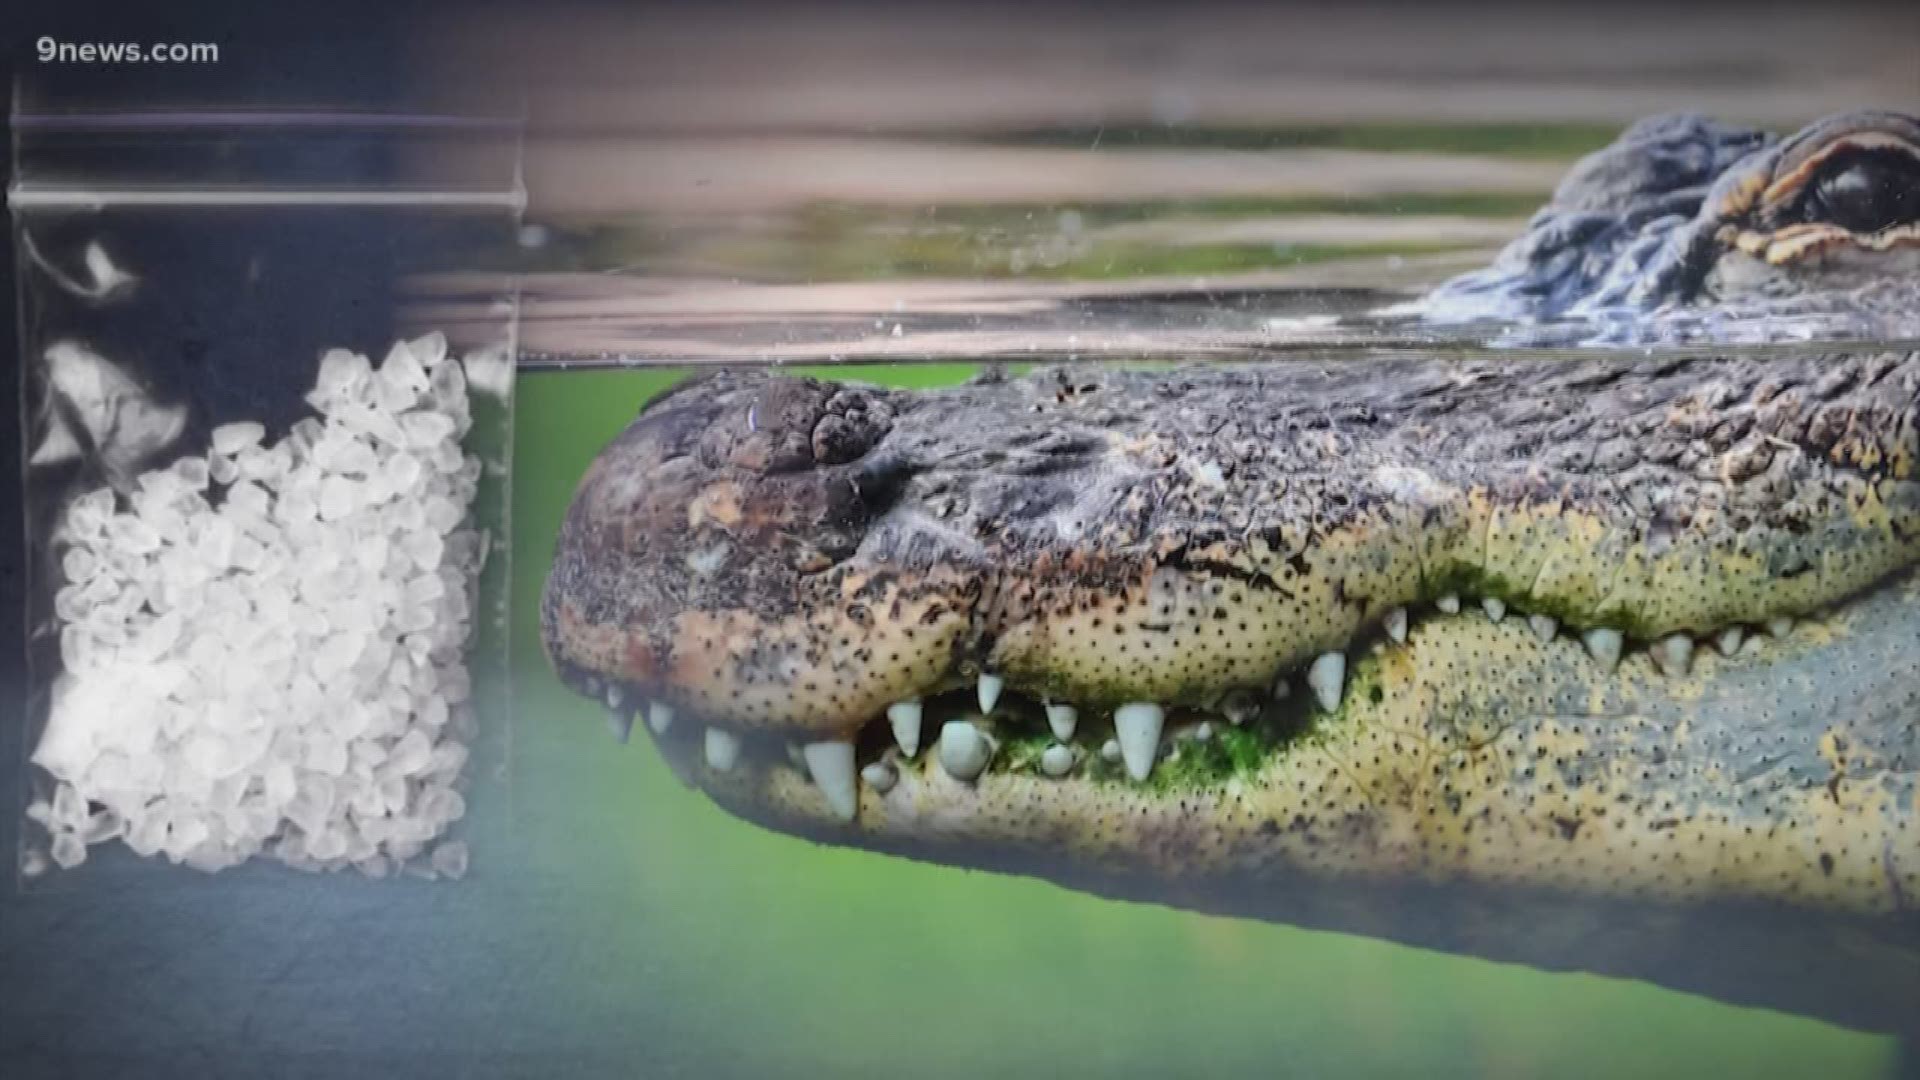 This round of alligator news features escapee gators, meth gators and Chance the Snapper.